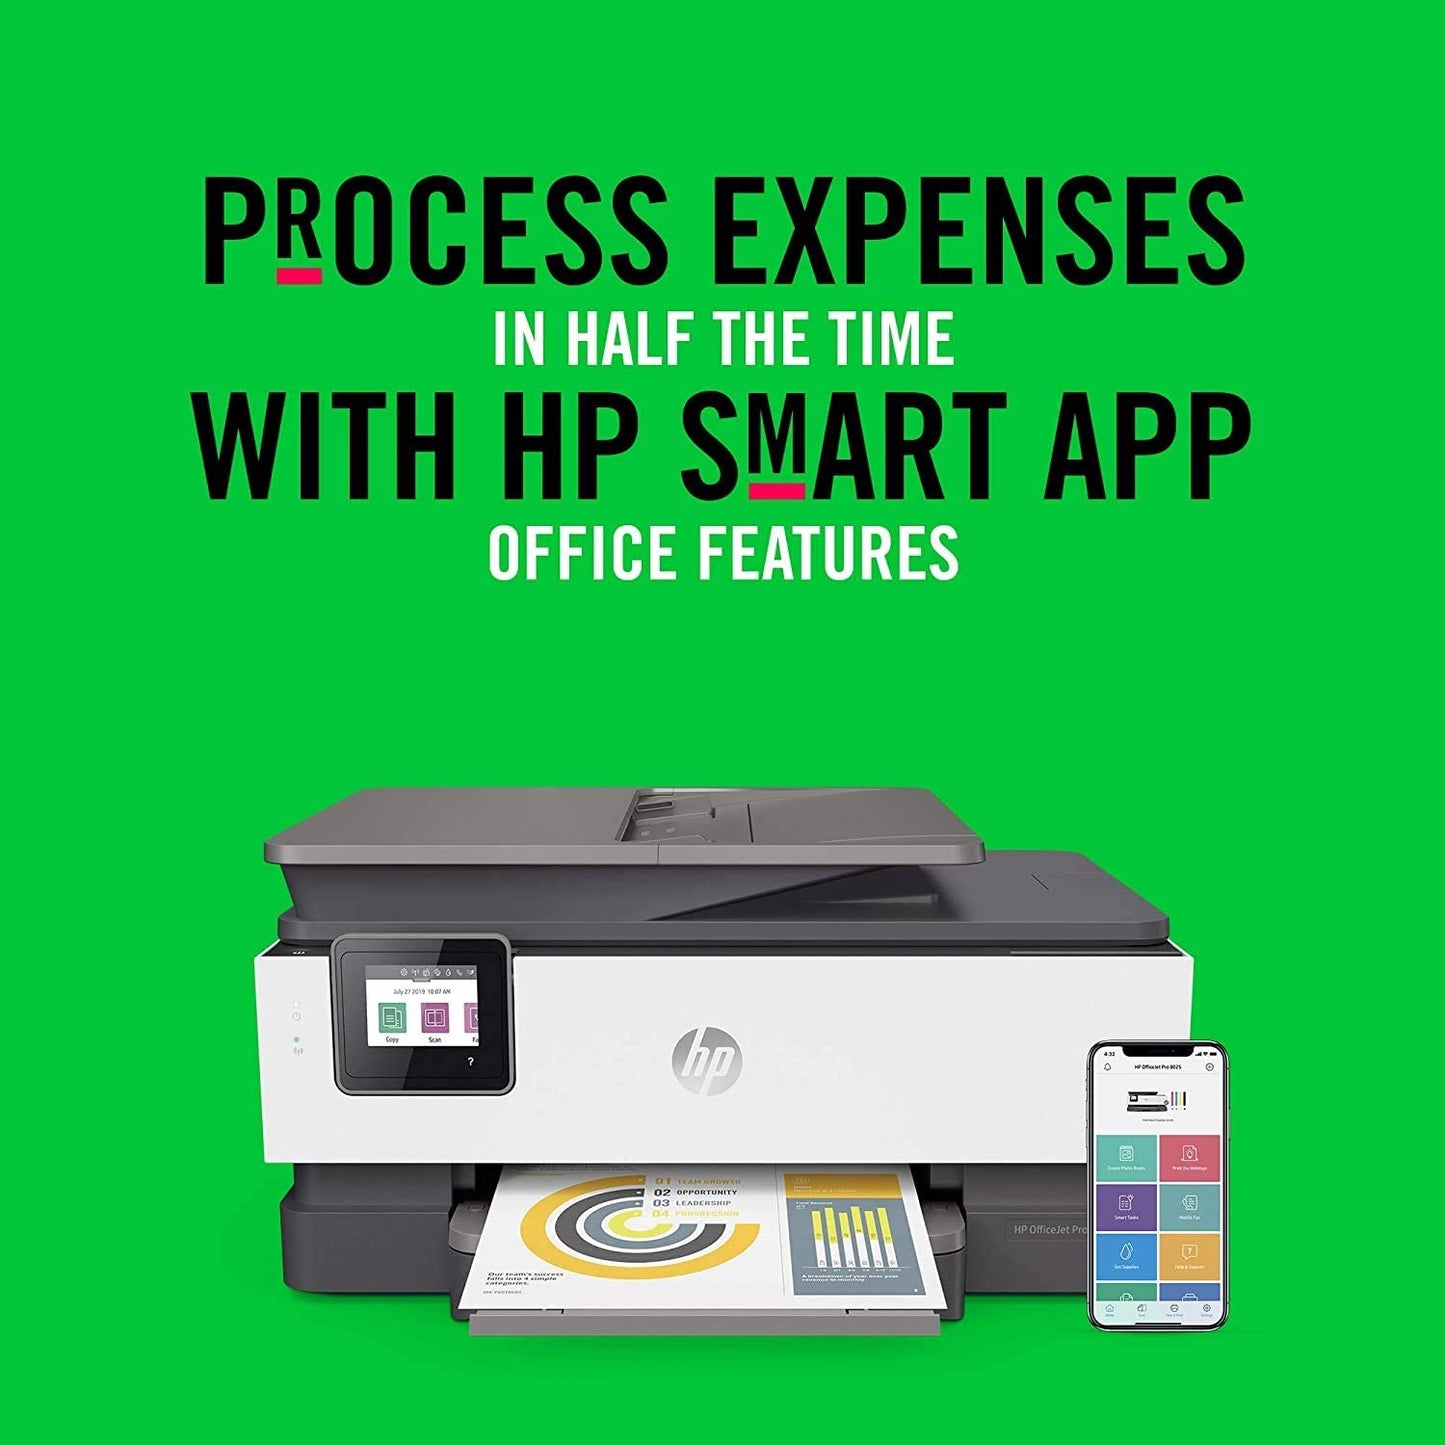 Hp Officejet Pro 8025 All-In-One Wireless Printer, Smart Home Office Productivity